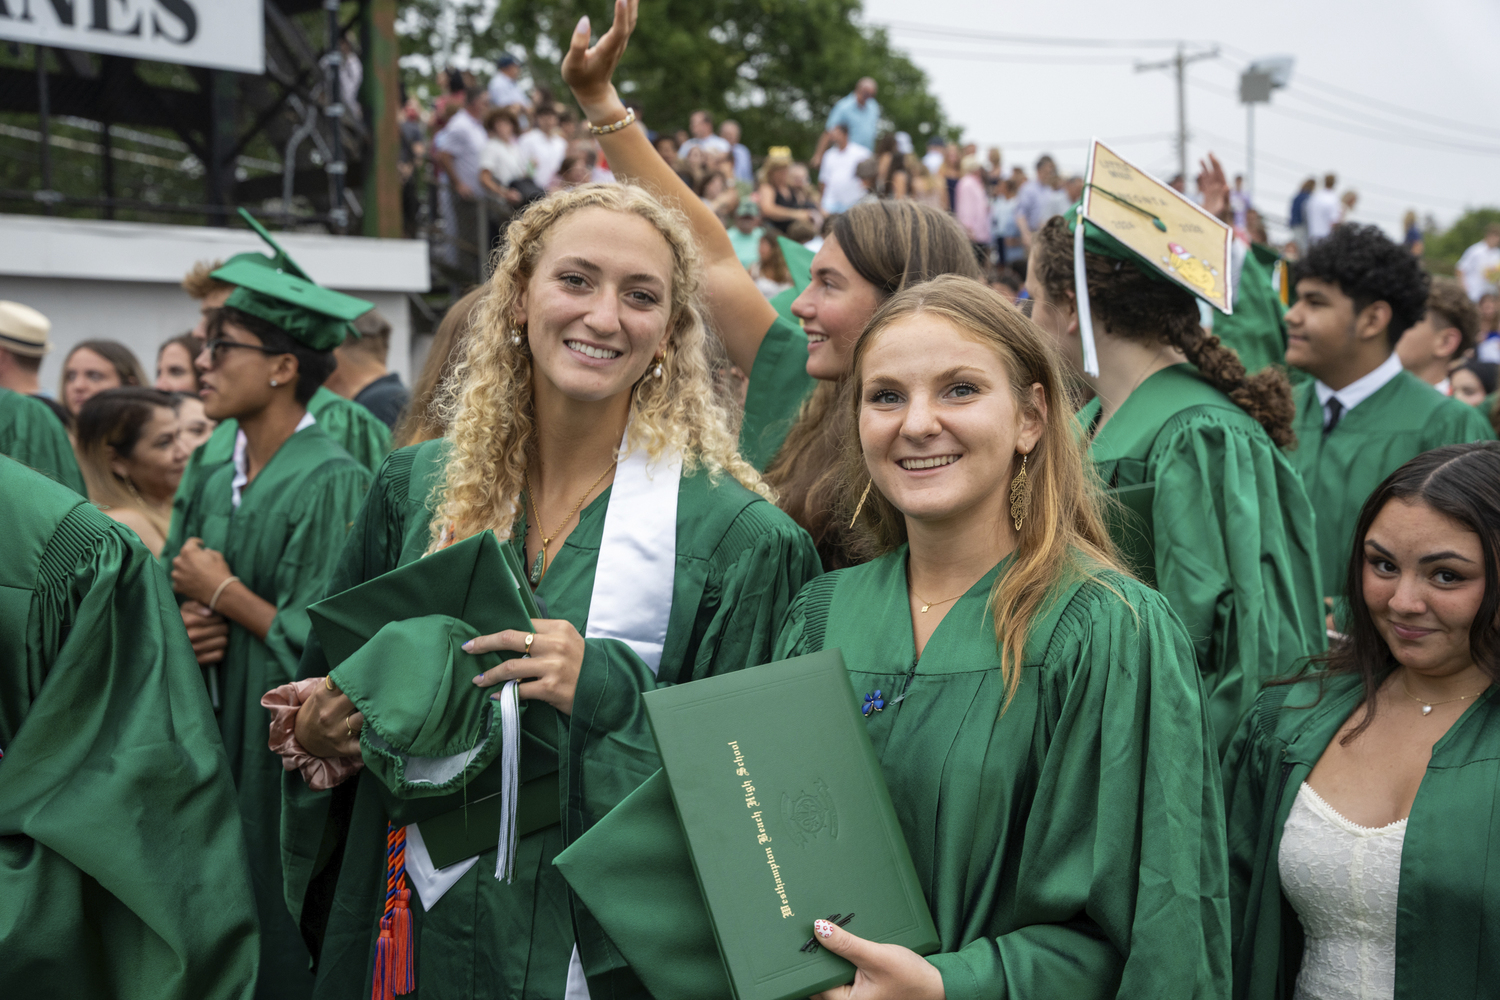 Graduates celebrate after Westhampton Beach High School commencement on June 26.    RON ESPOSITO